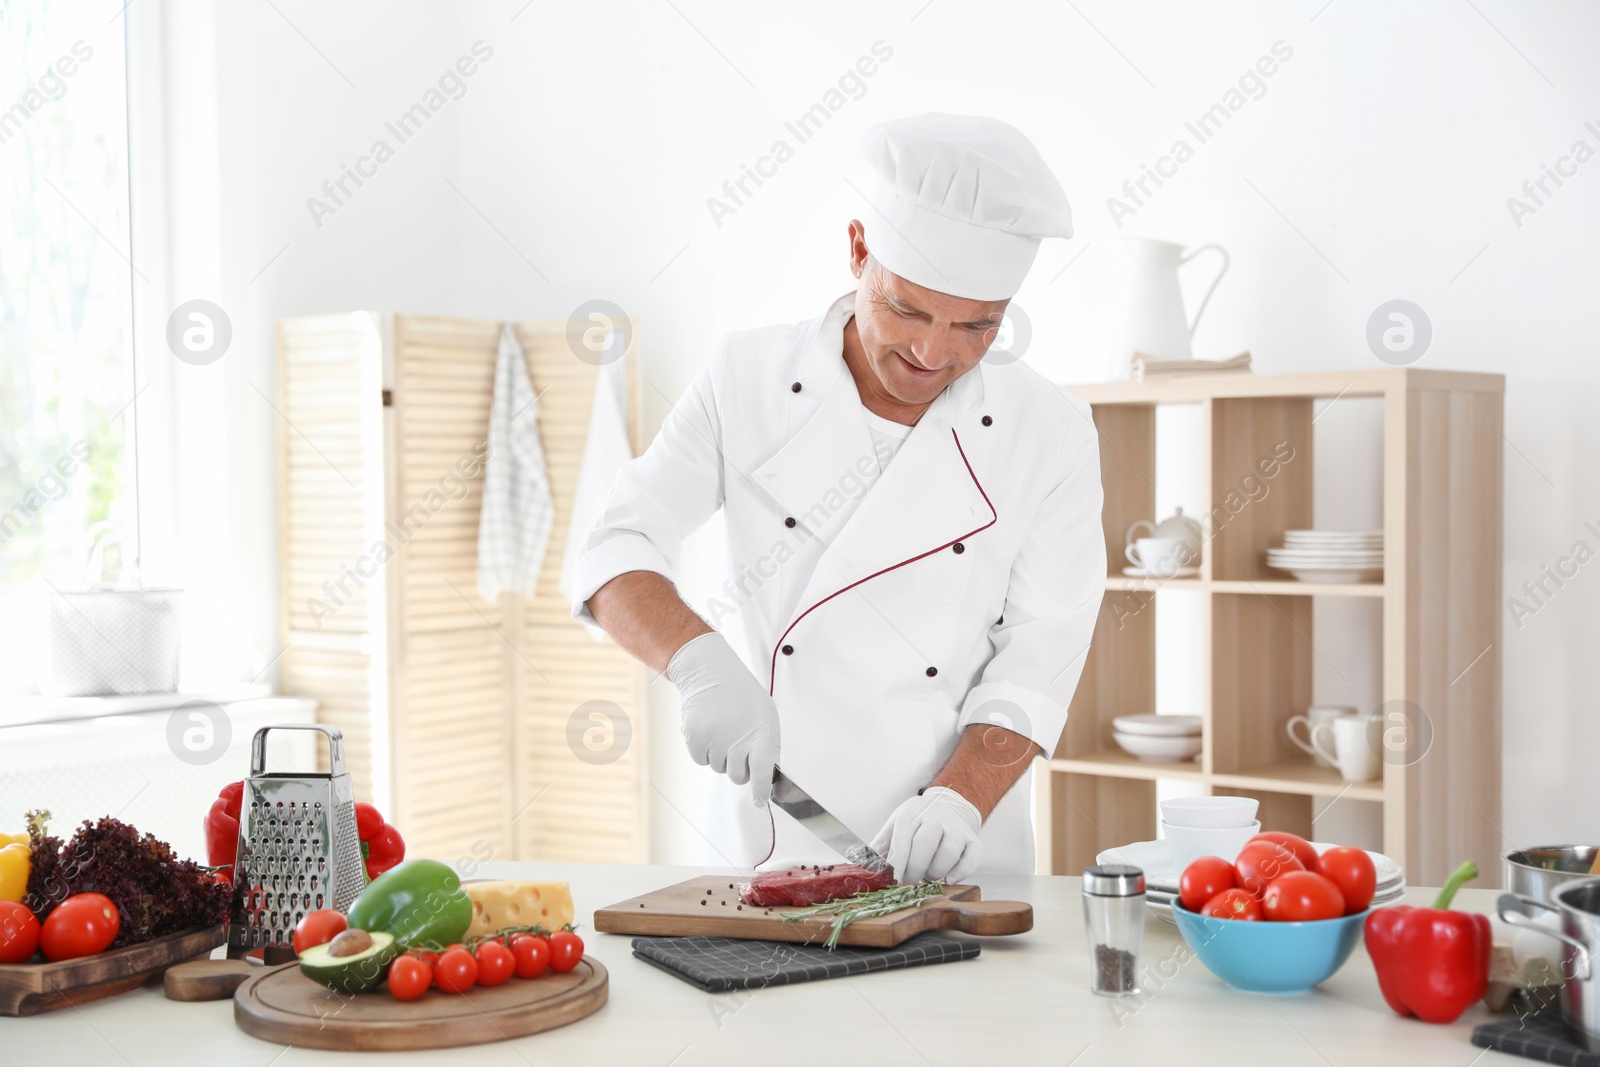 Photo of Professional chef cutting meat on table in kitchen